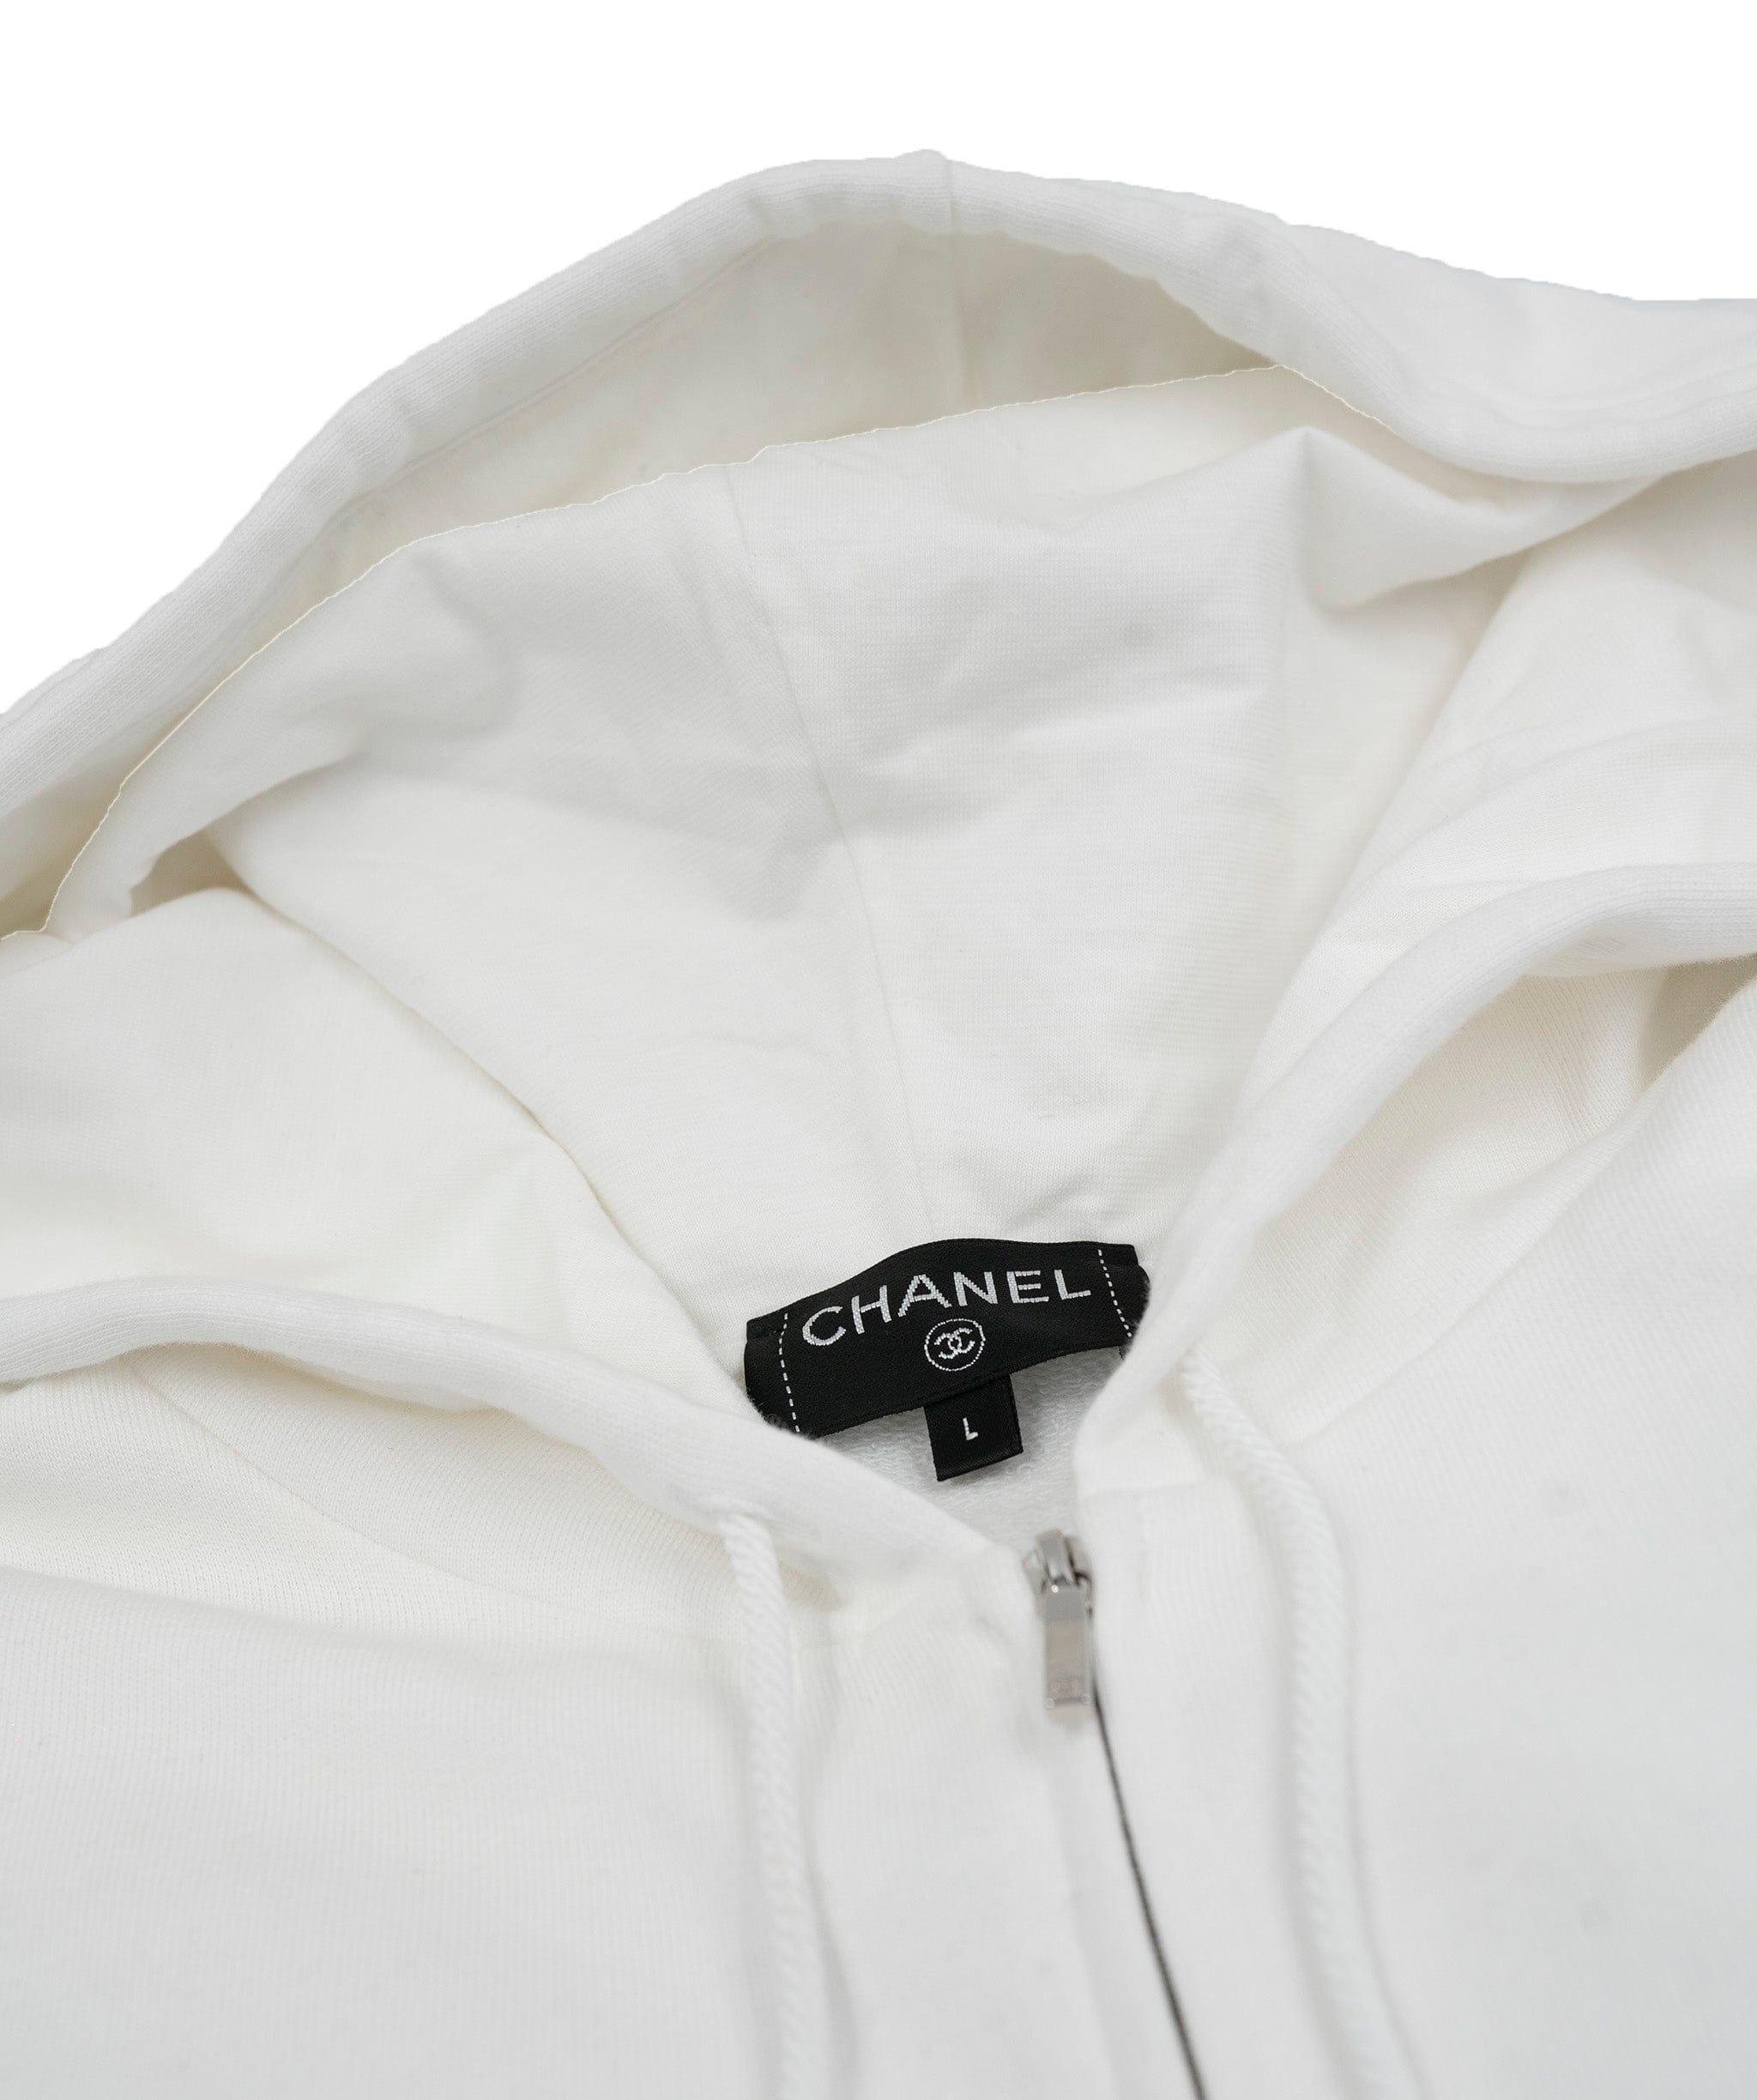 Chanel chanel coco chanel patchwork hoodie chanel white knit ALC0164